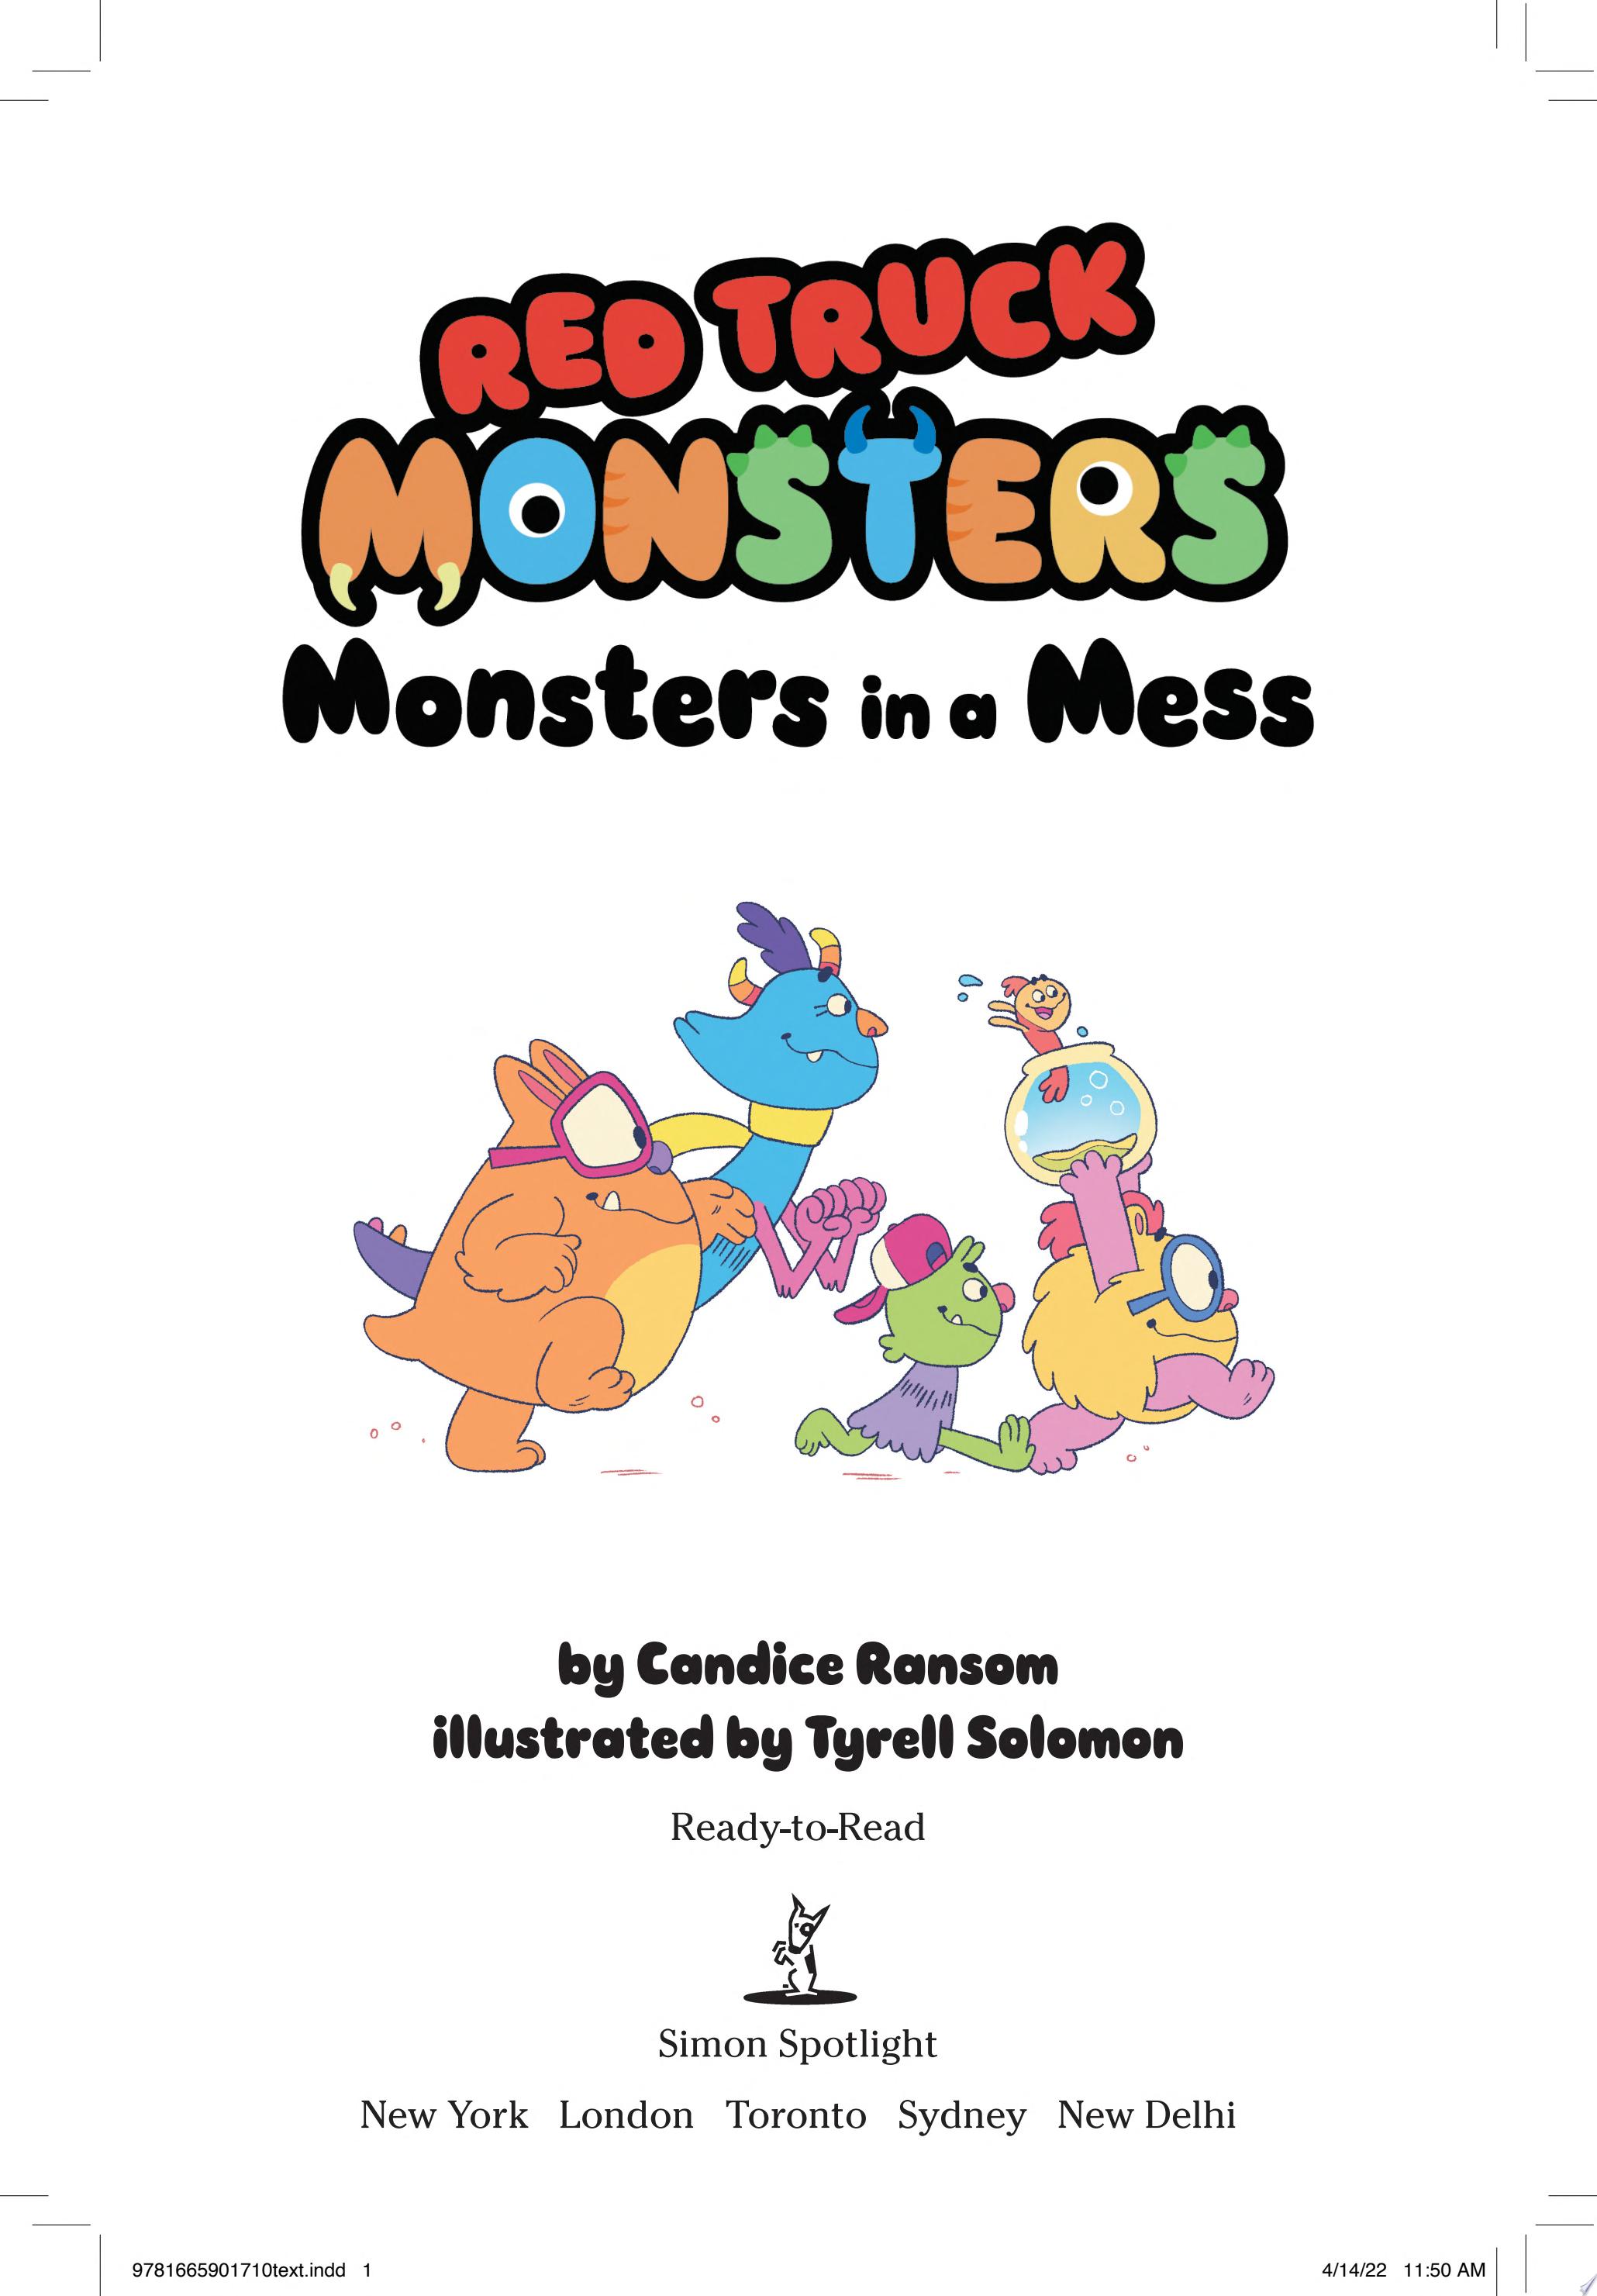 Image for "Monsters in a Mess"